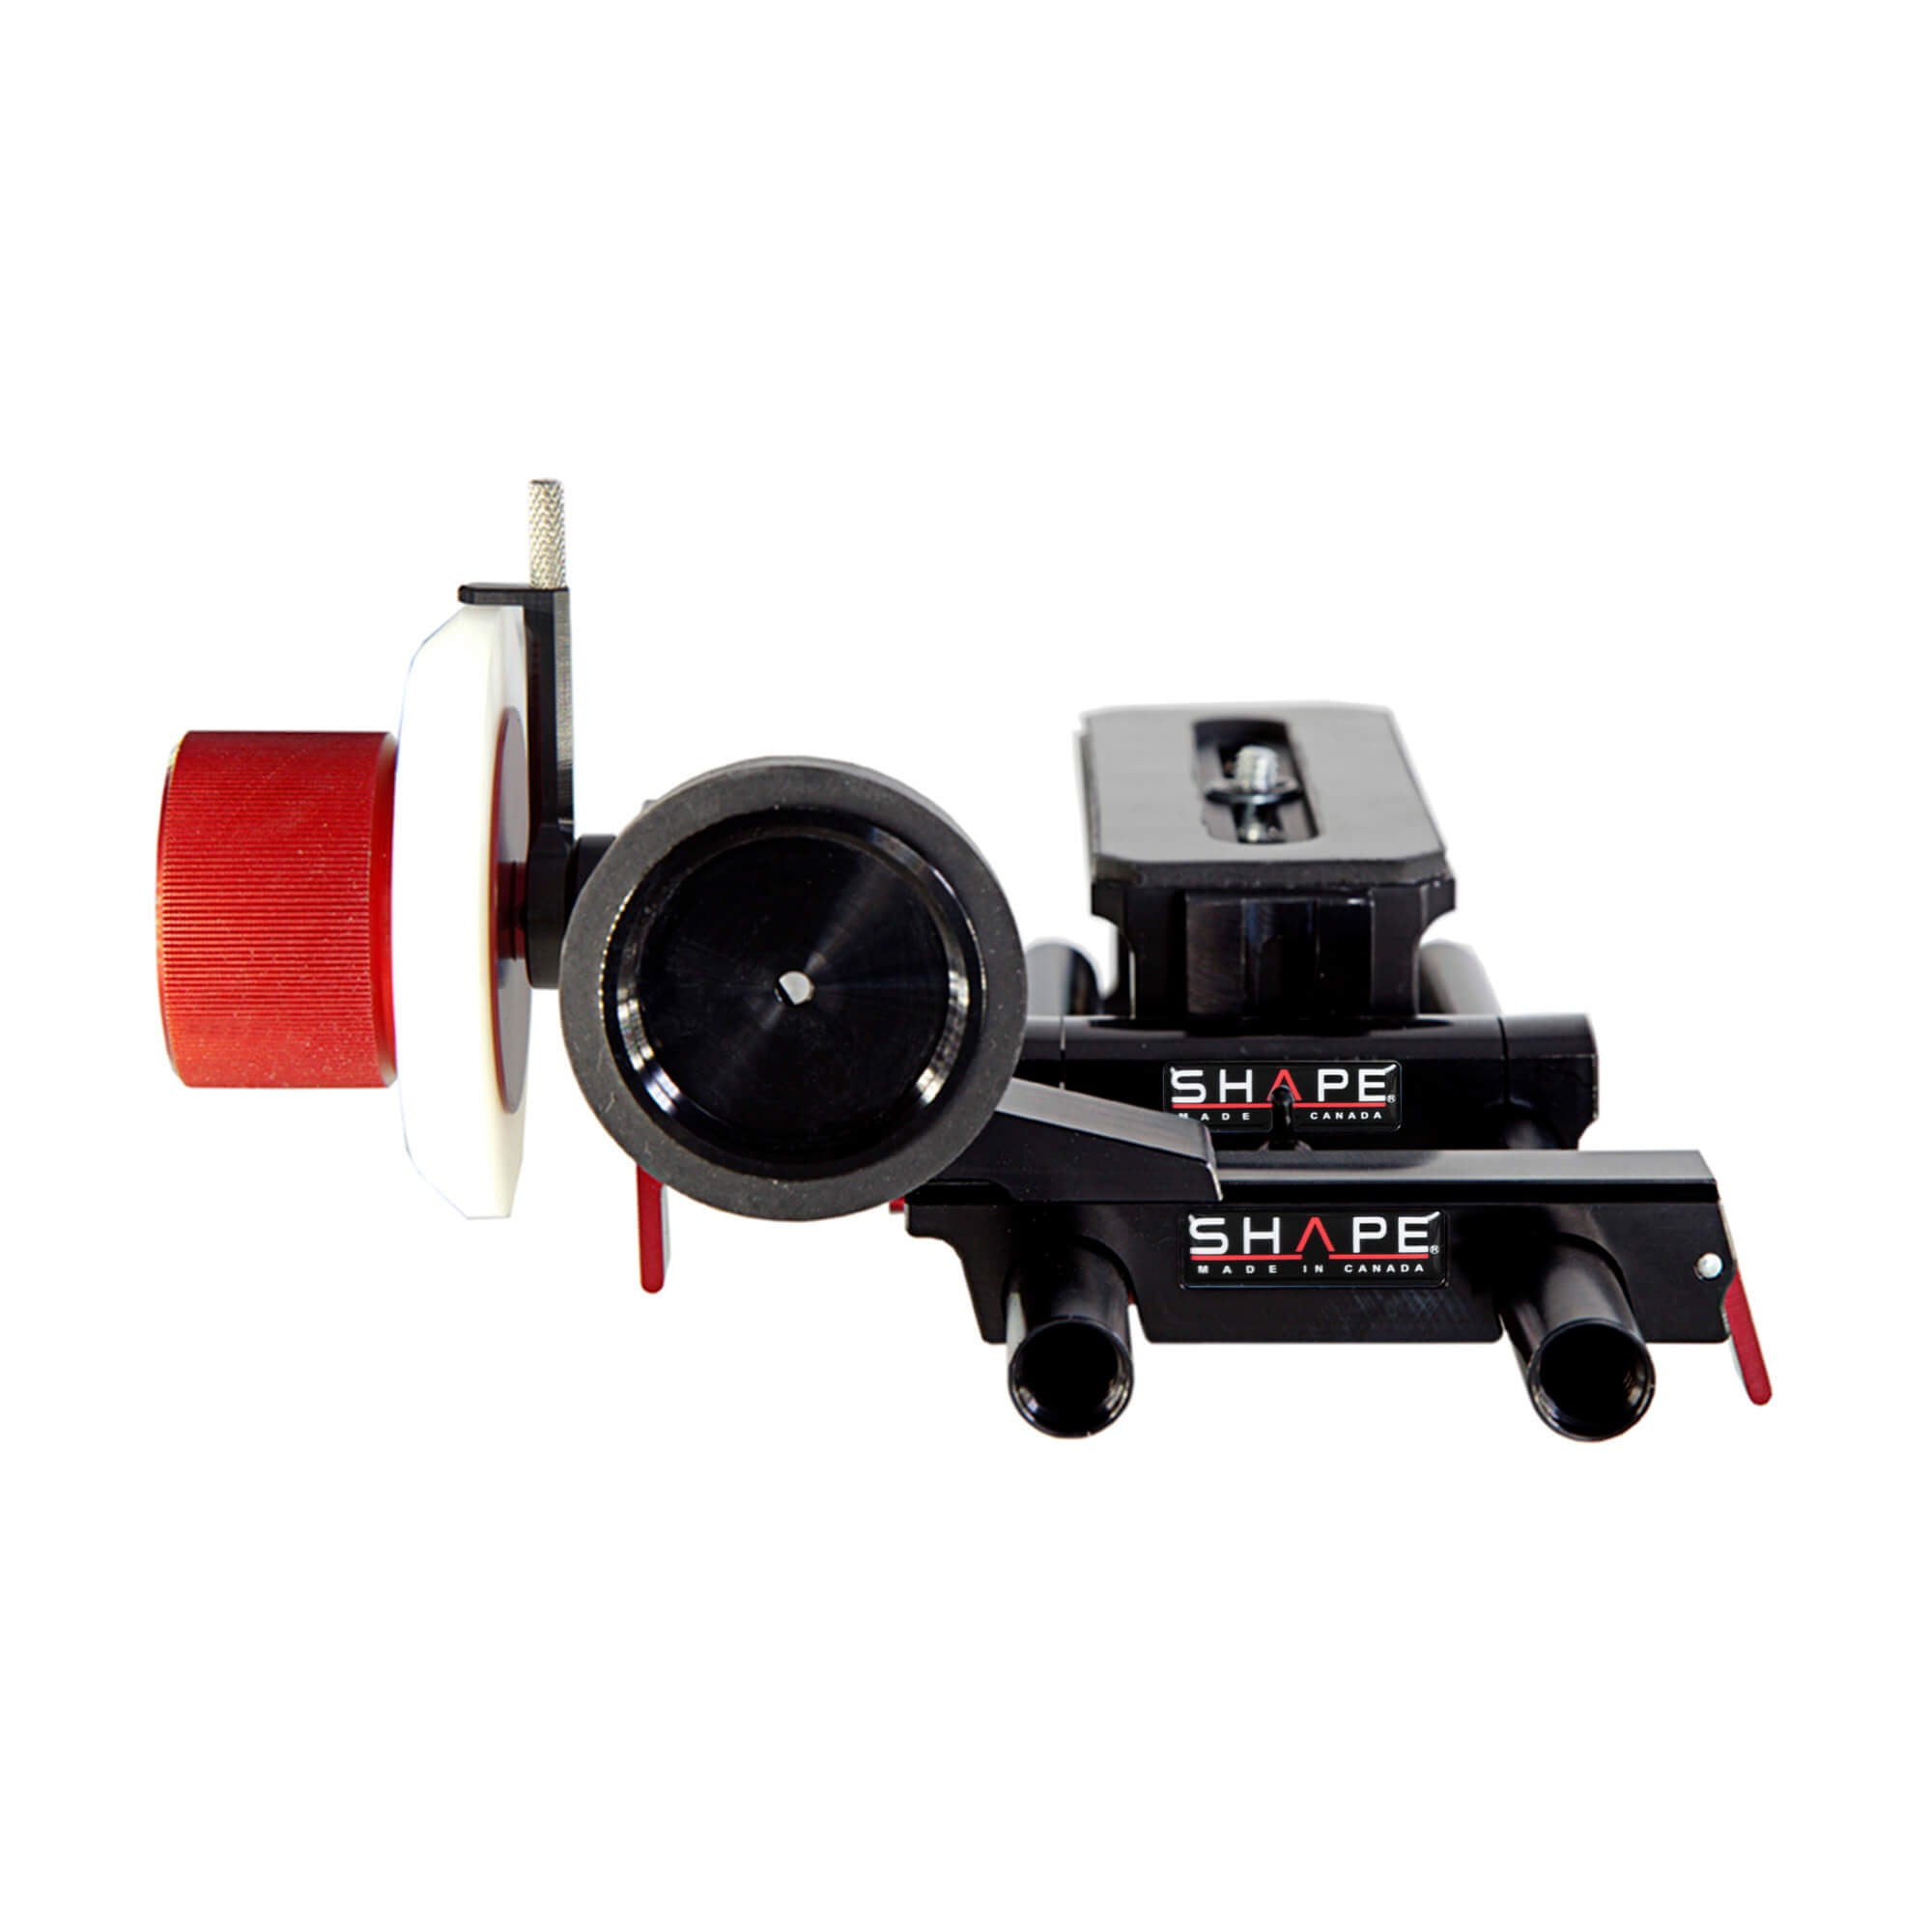 SHAPE Paparazzi Riser with 15 mm Rod System